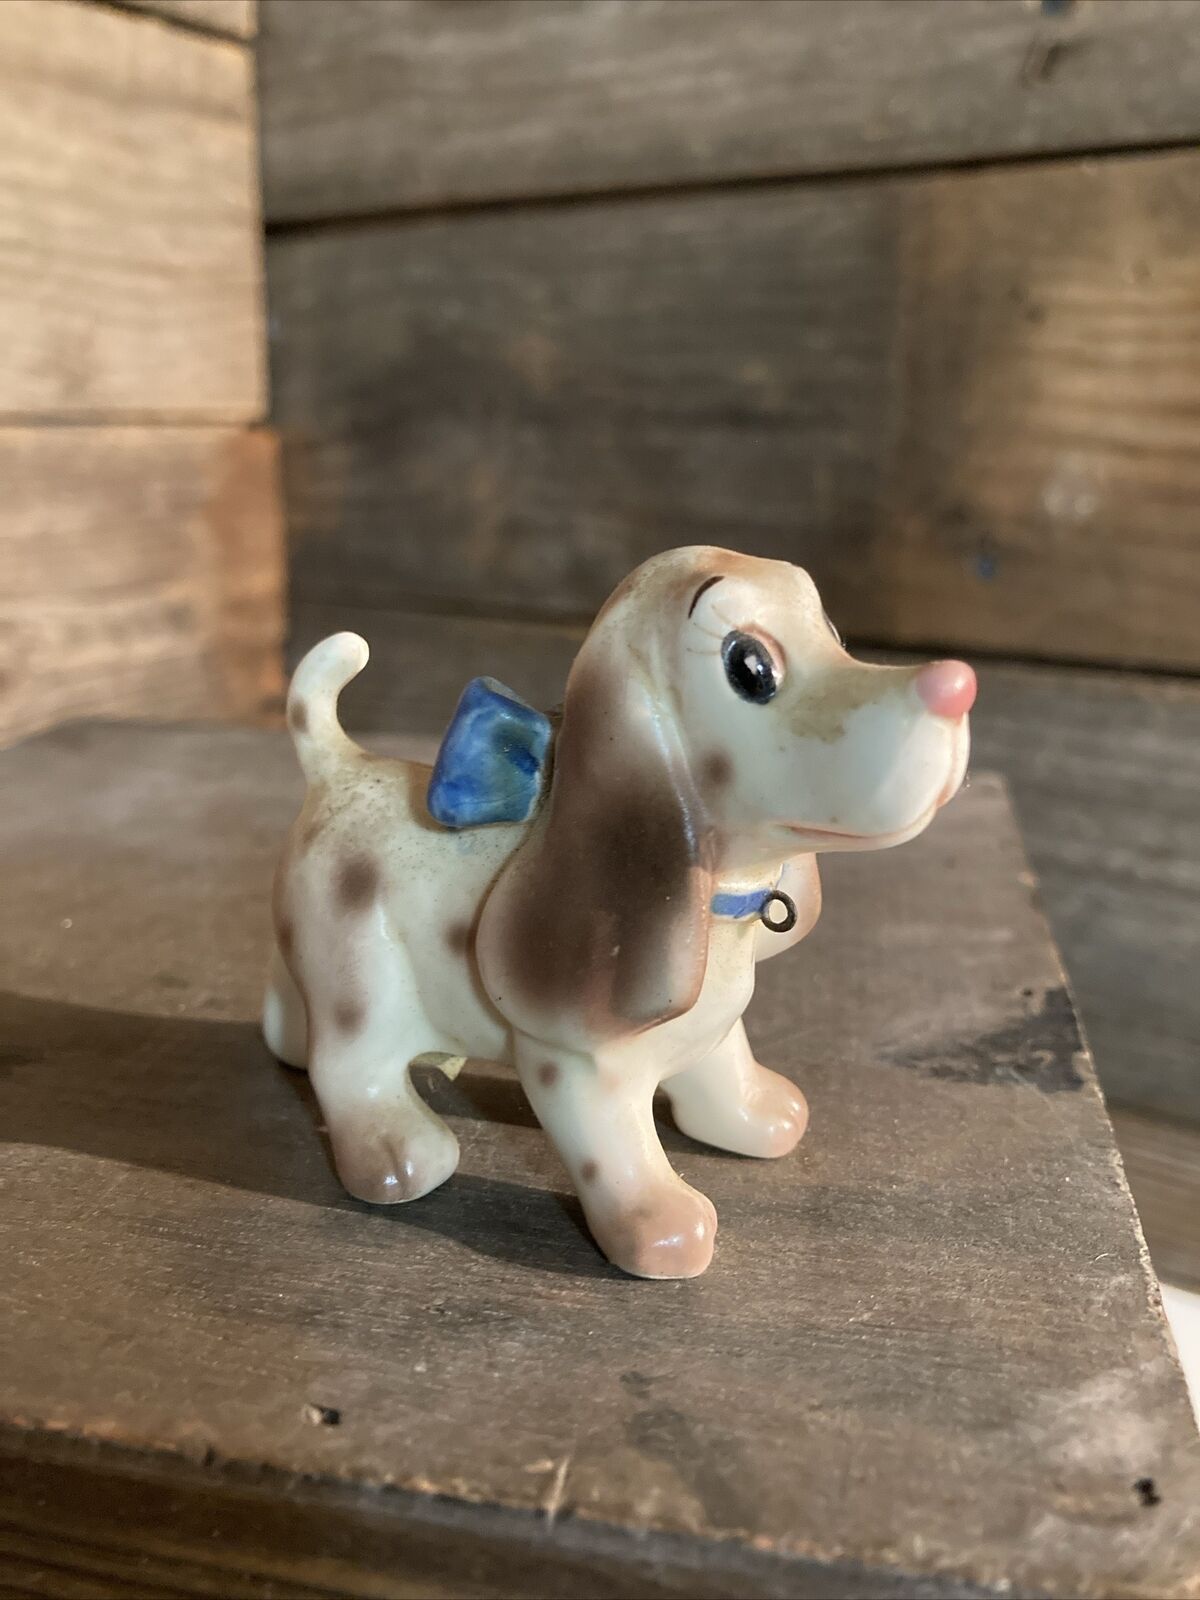 Vtg. Bassett Hound Figurine, Brown and White Dog with Spots & Bow Japan